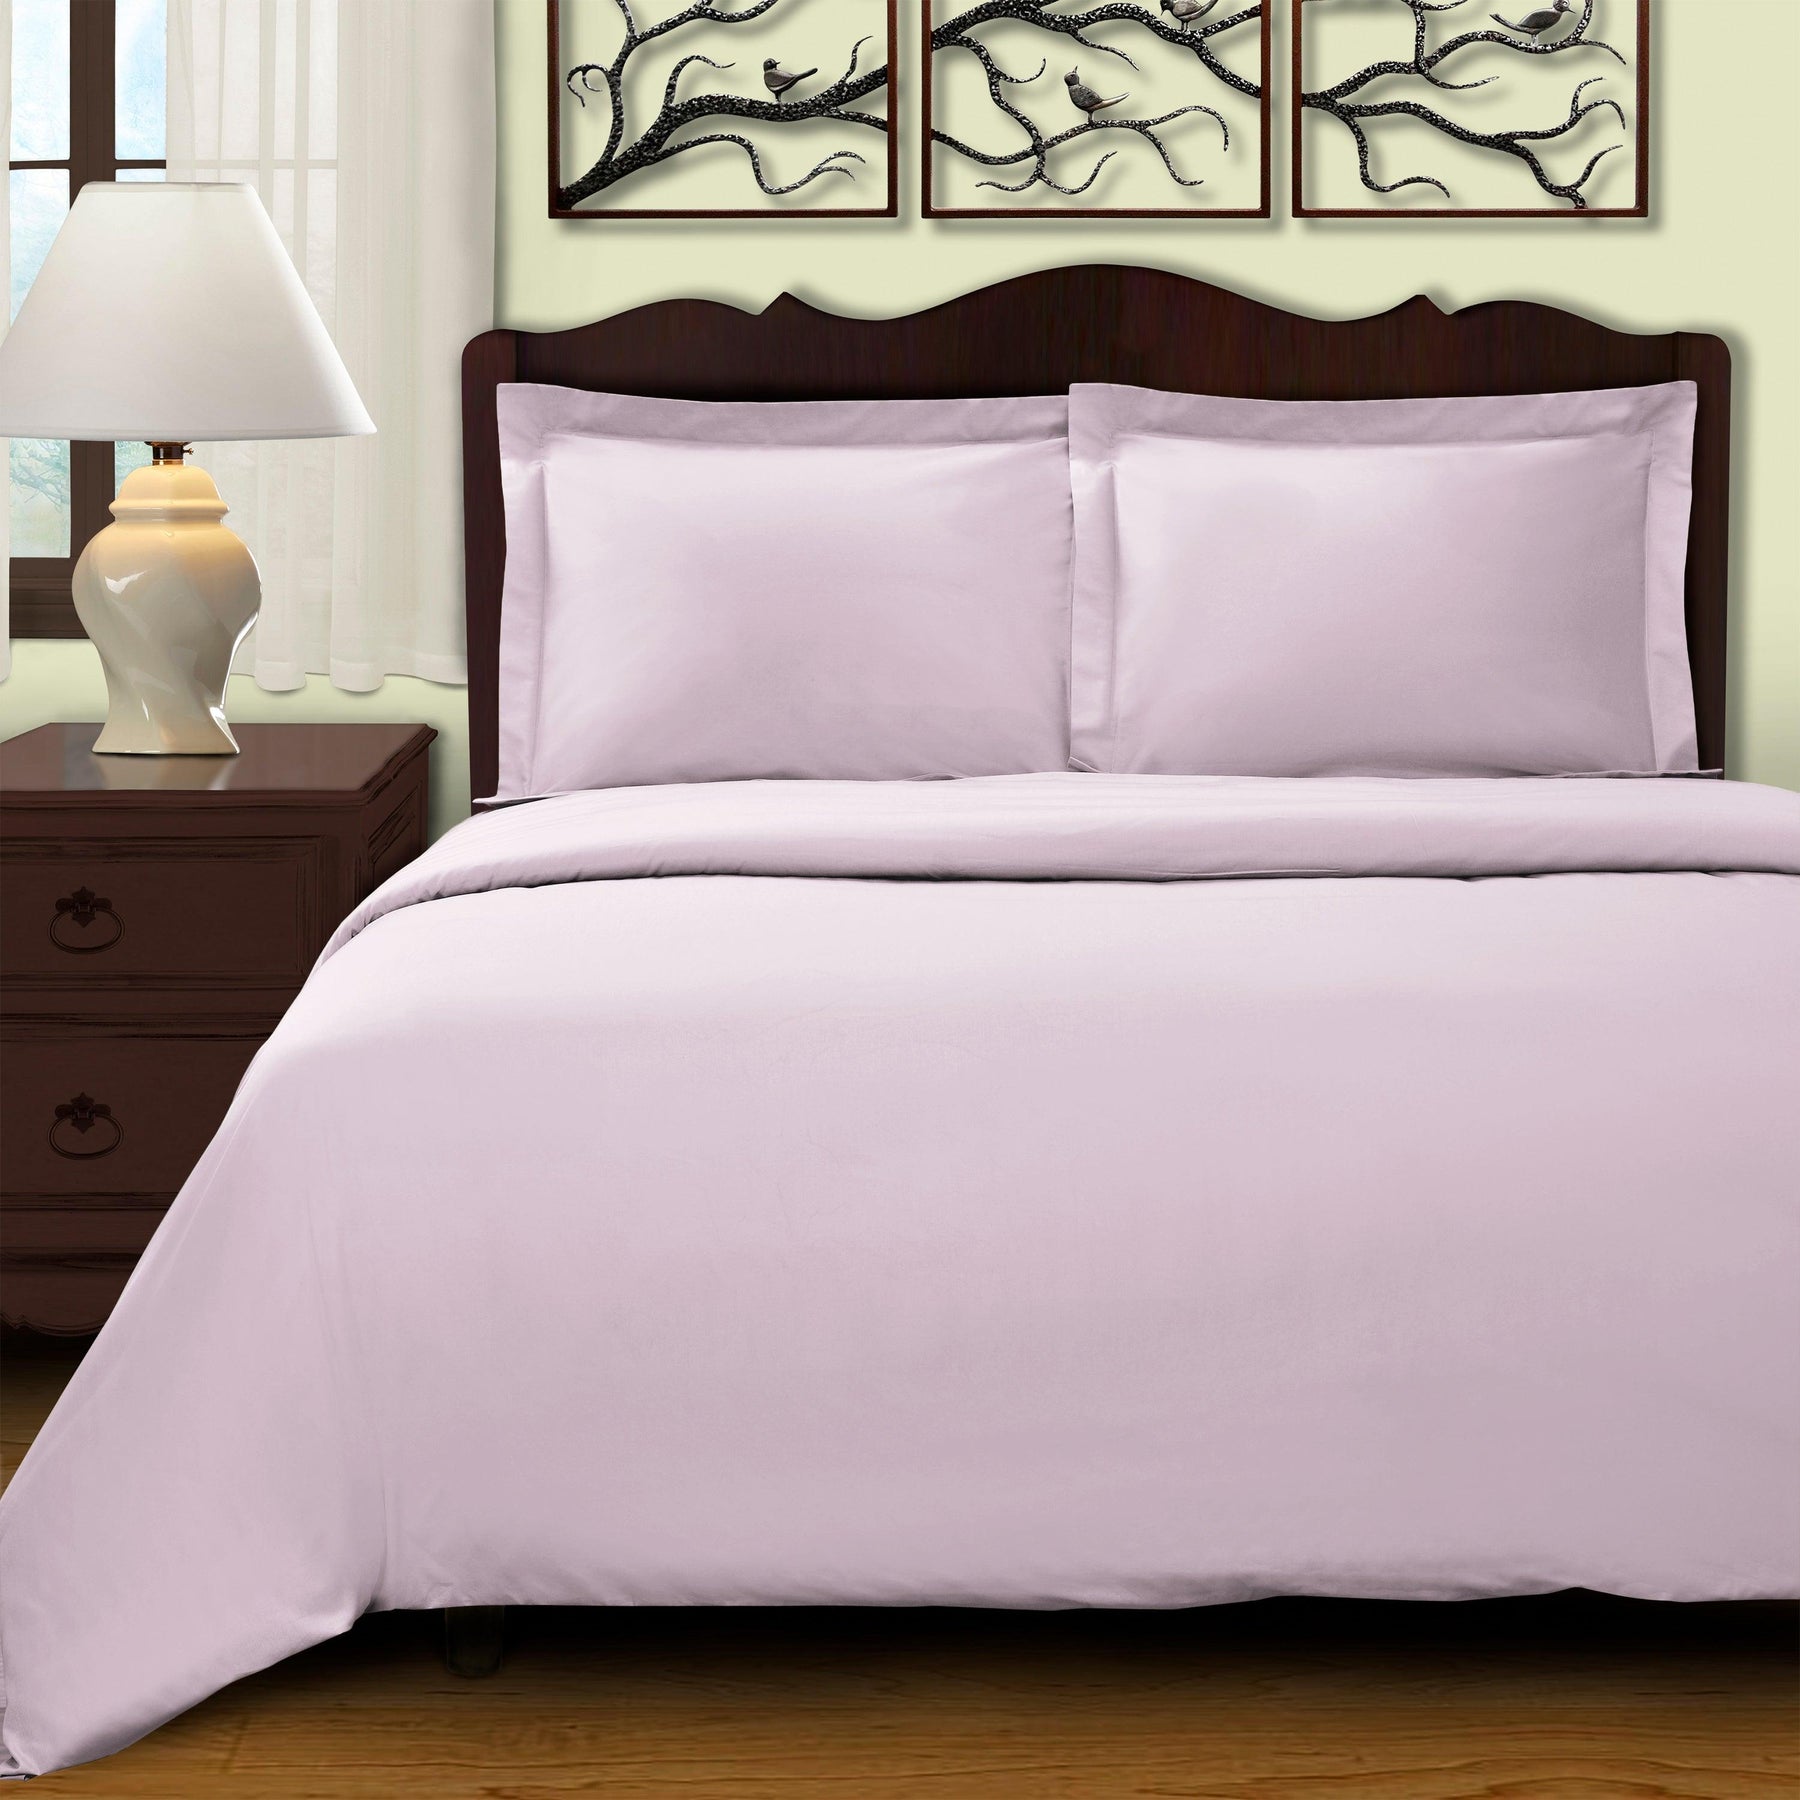  Superior Egyptian Cotton 400 Thread Count Solid Duvet Cover Set - LIlac